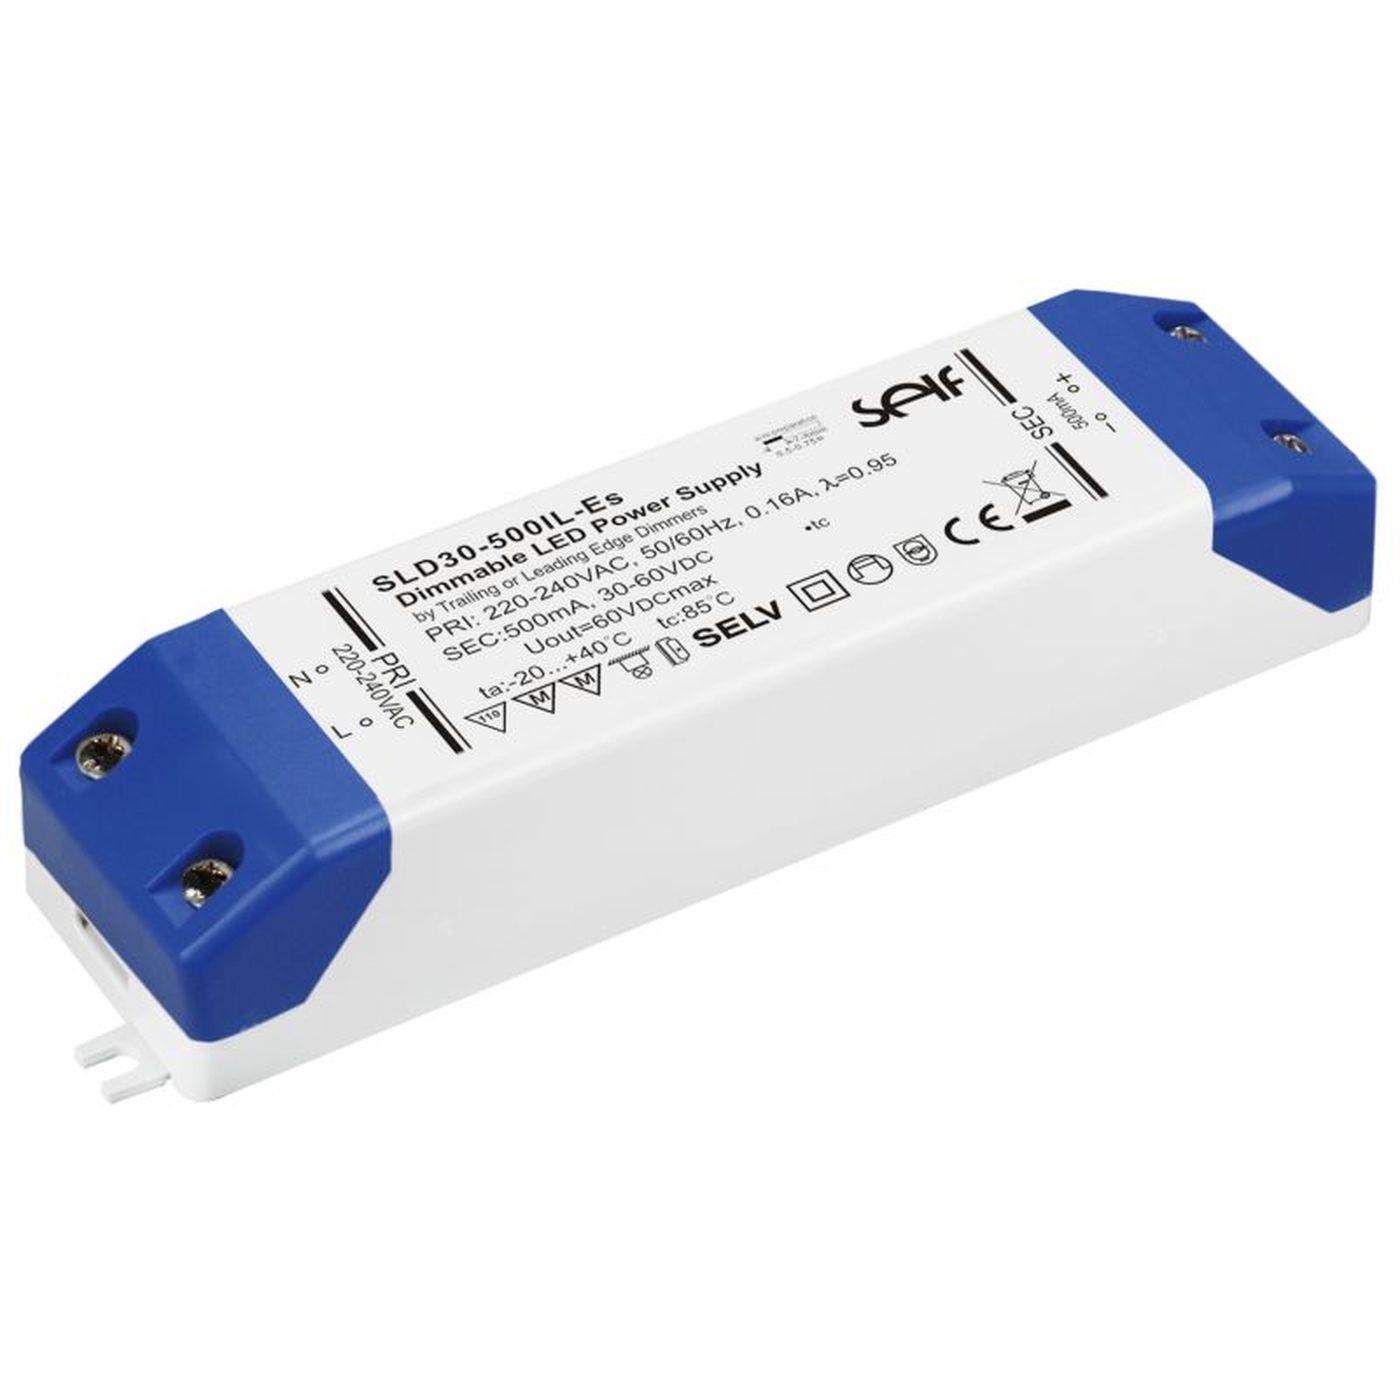 SLD30-500IL-ES 30W 500mA 30...60VDC Constant current LED power supply Driver Transformer Triac Dimmable